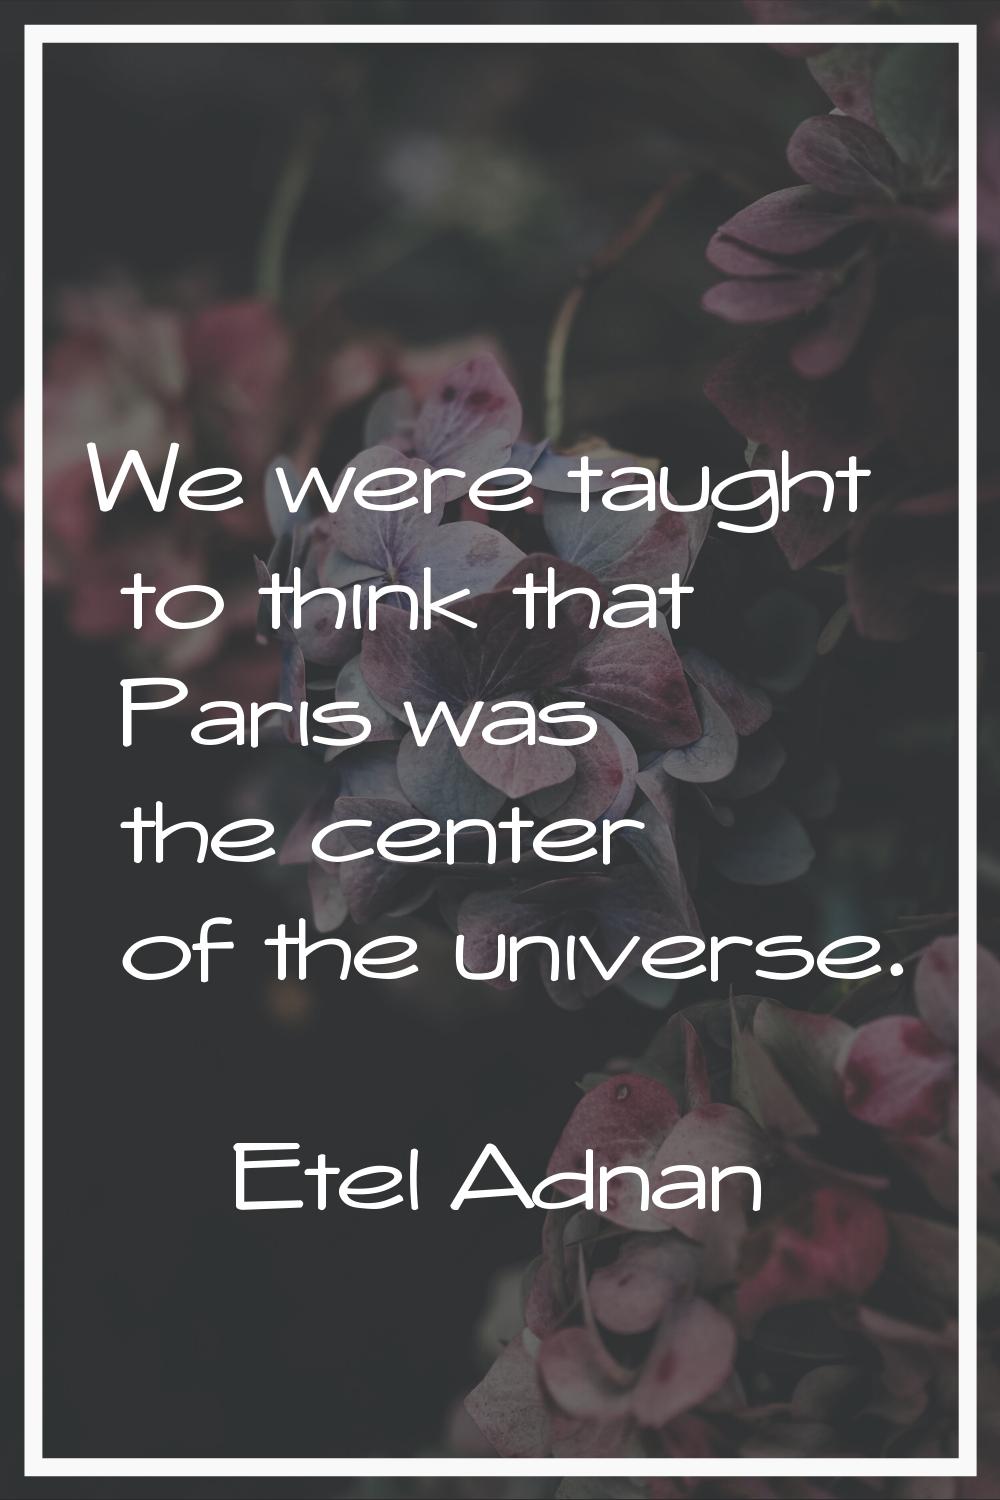 We were taught to think that Paris was the center of the universe.